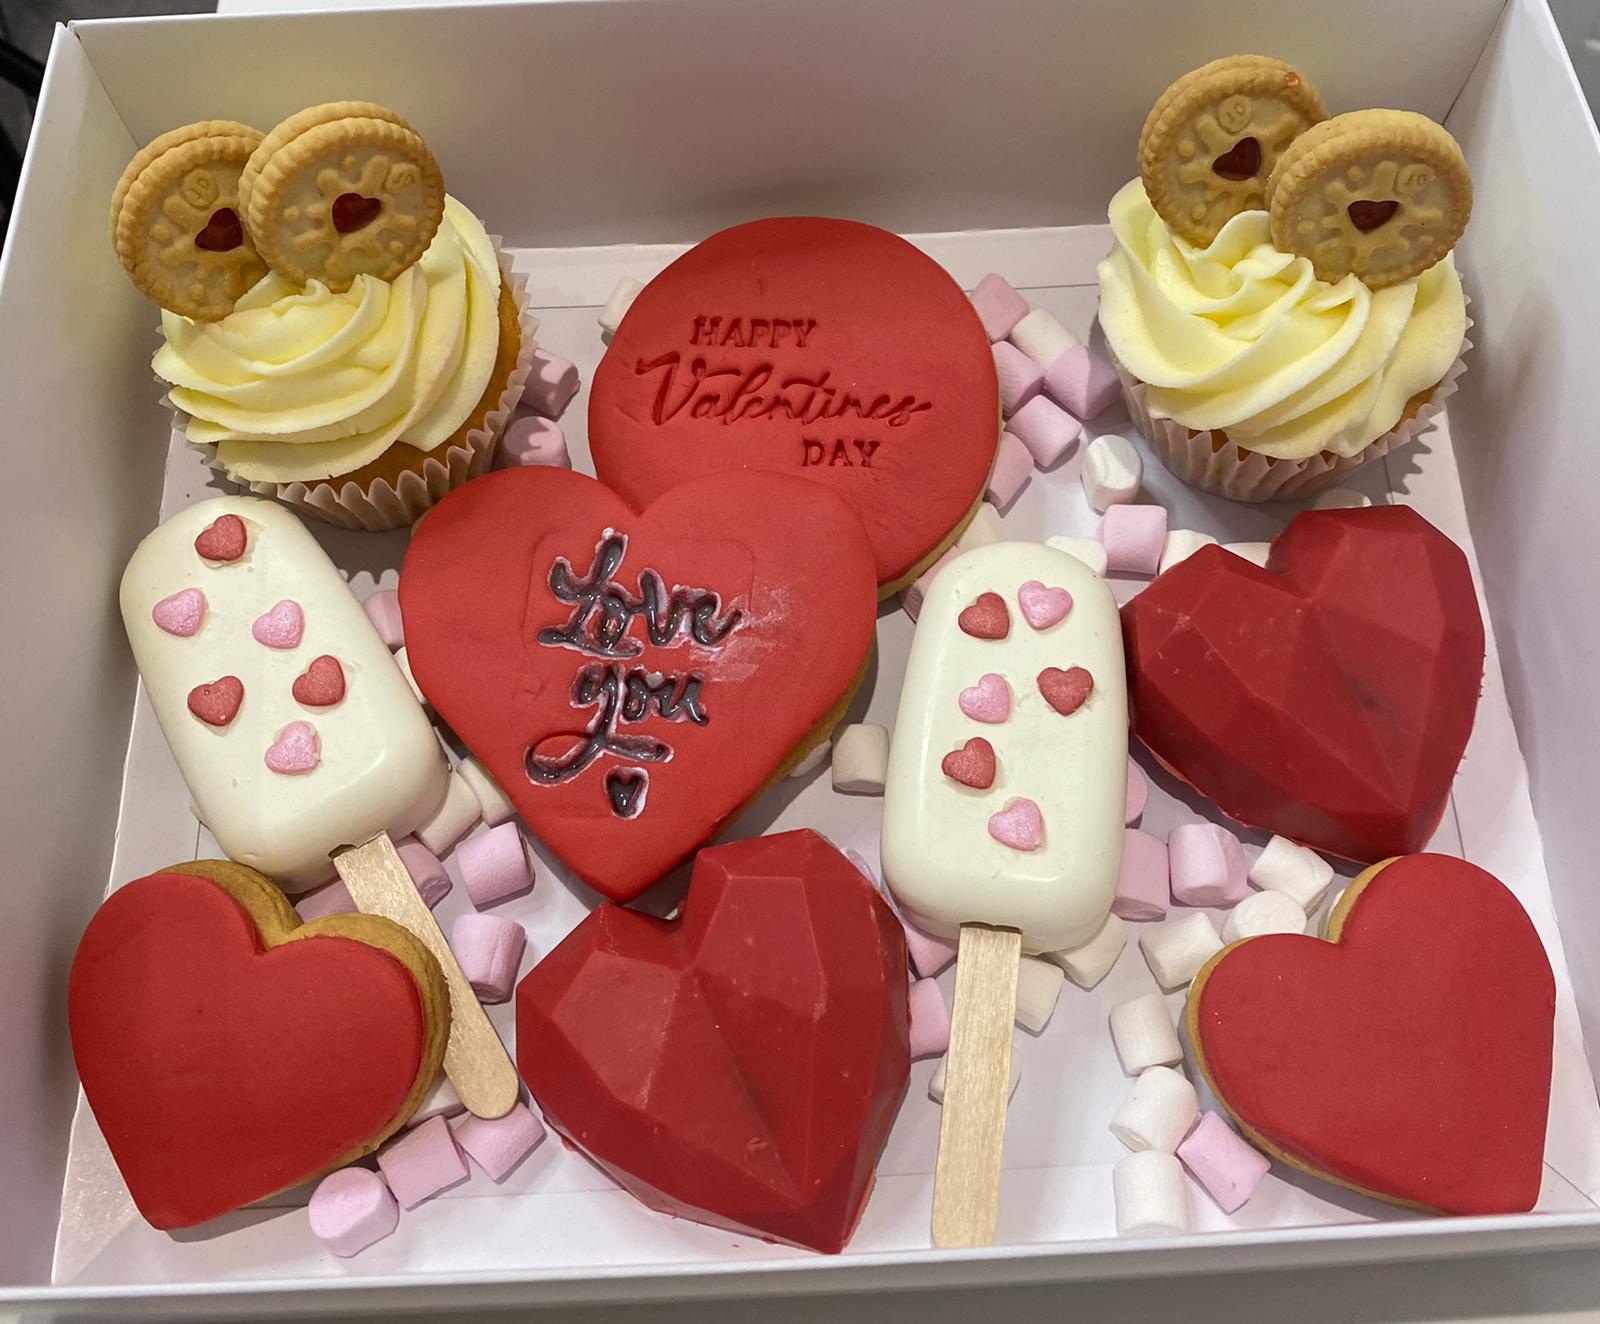 Valentines day tips and suggestions for Brighton - image of caked and all things baked valentines day box